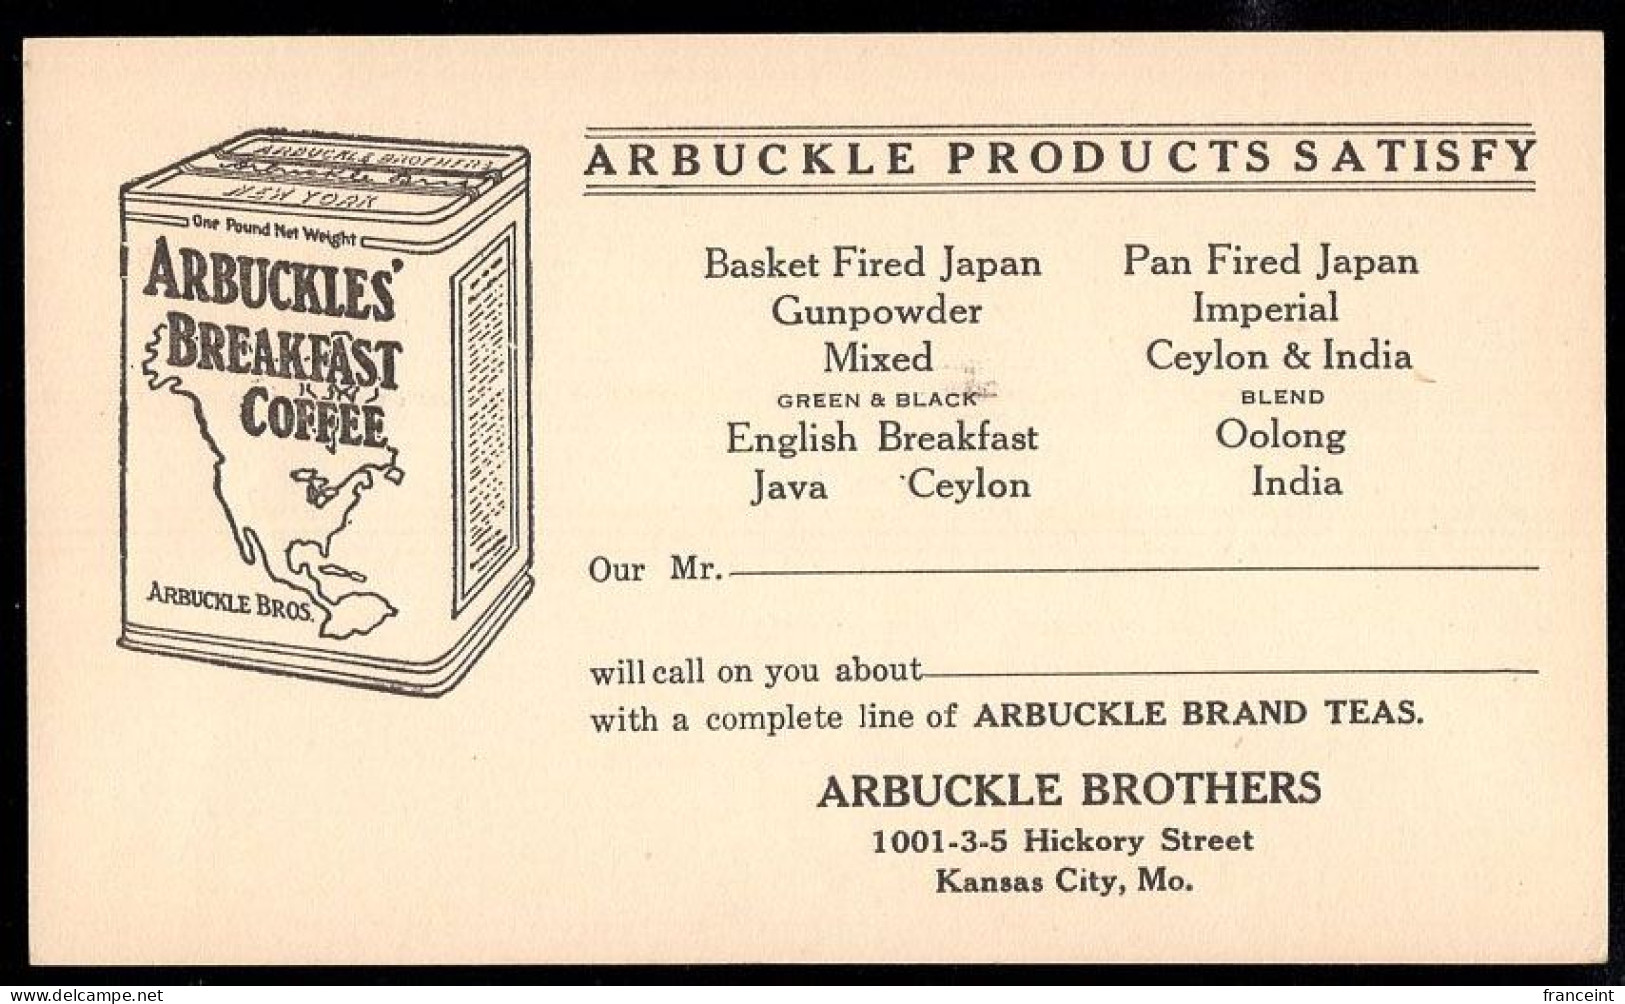 U.S.A.(1920) Can Of Coffee. Postal Card With Illustrated Ad For Arbuckle Breakfast Coffee Mentioning Interesting Product - 1901-20